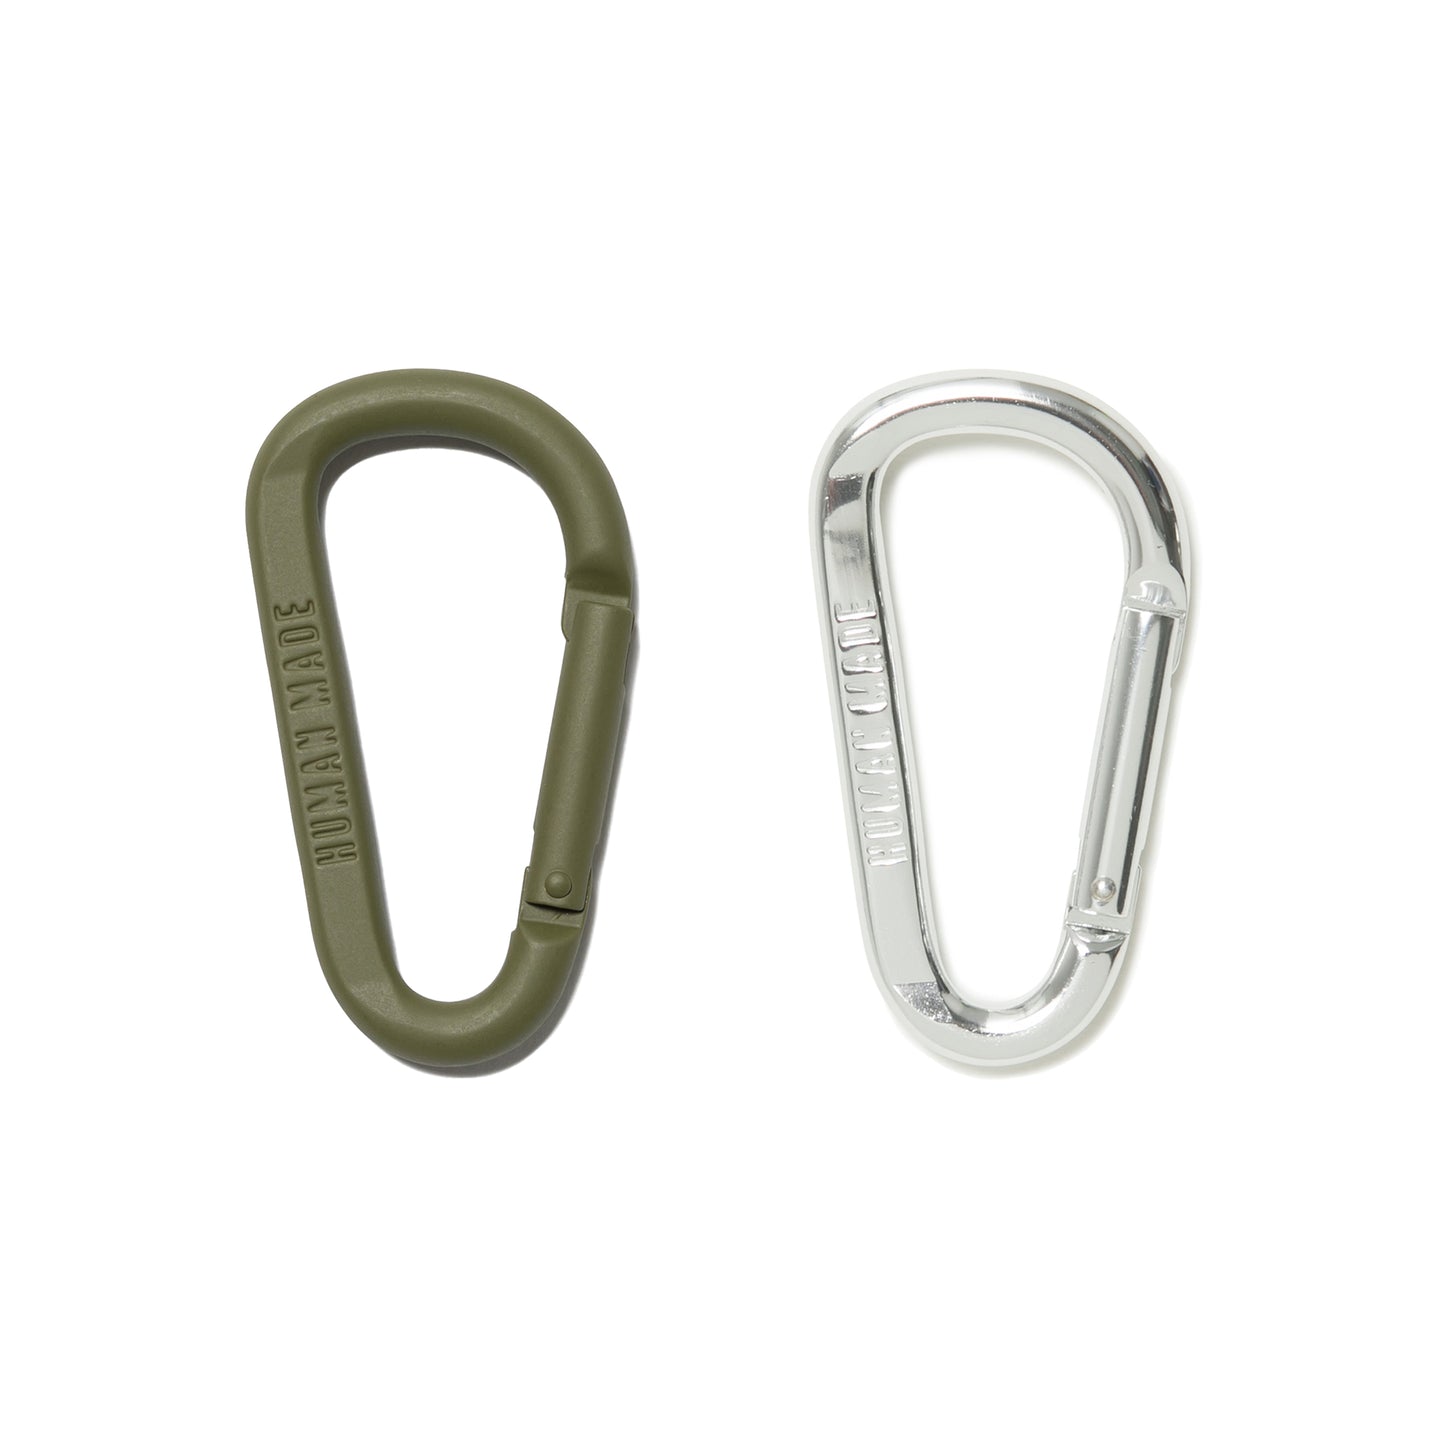 CARABINER 70mm – HUMAN MADE ONLINE STORE